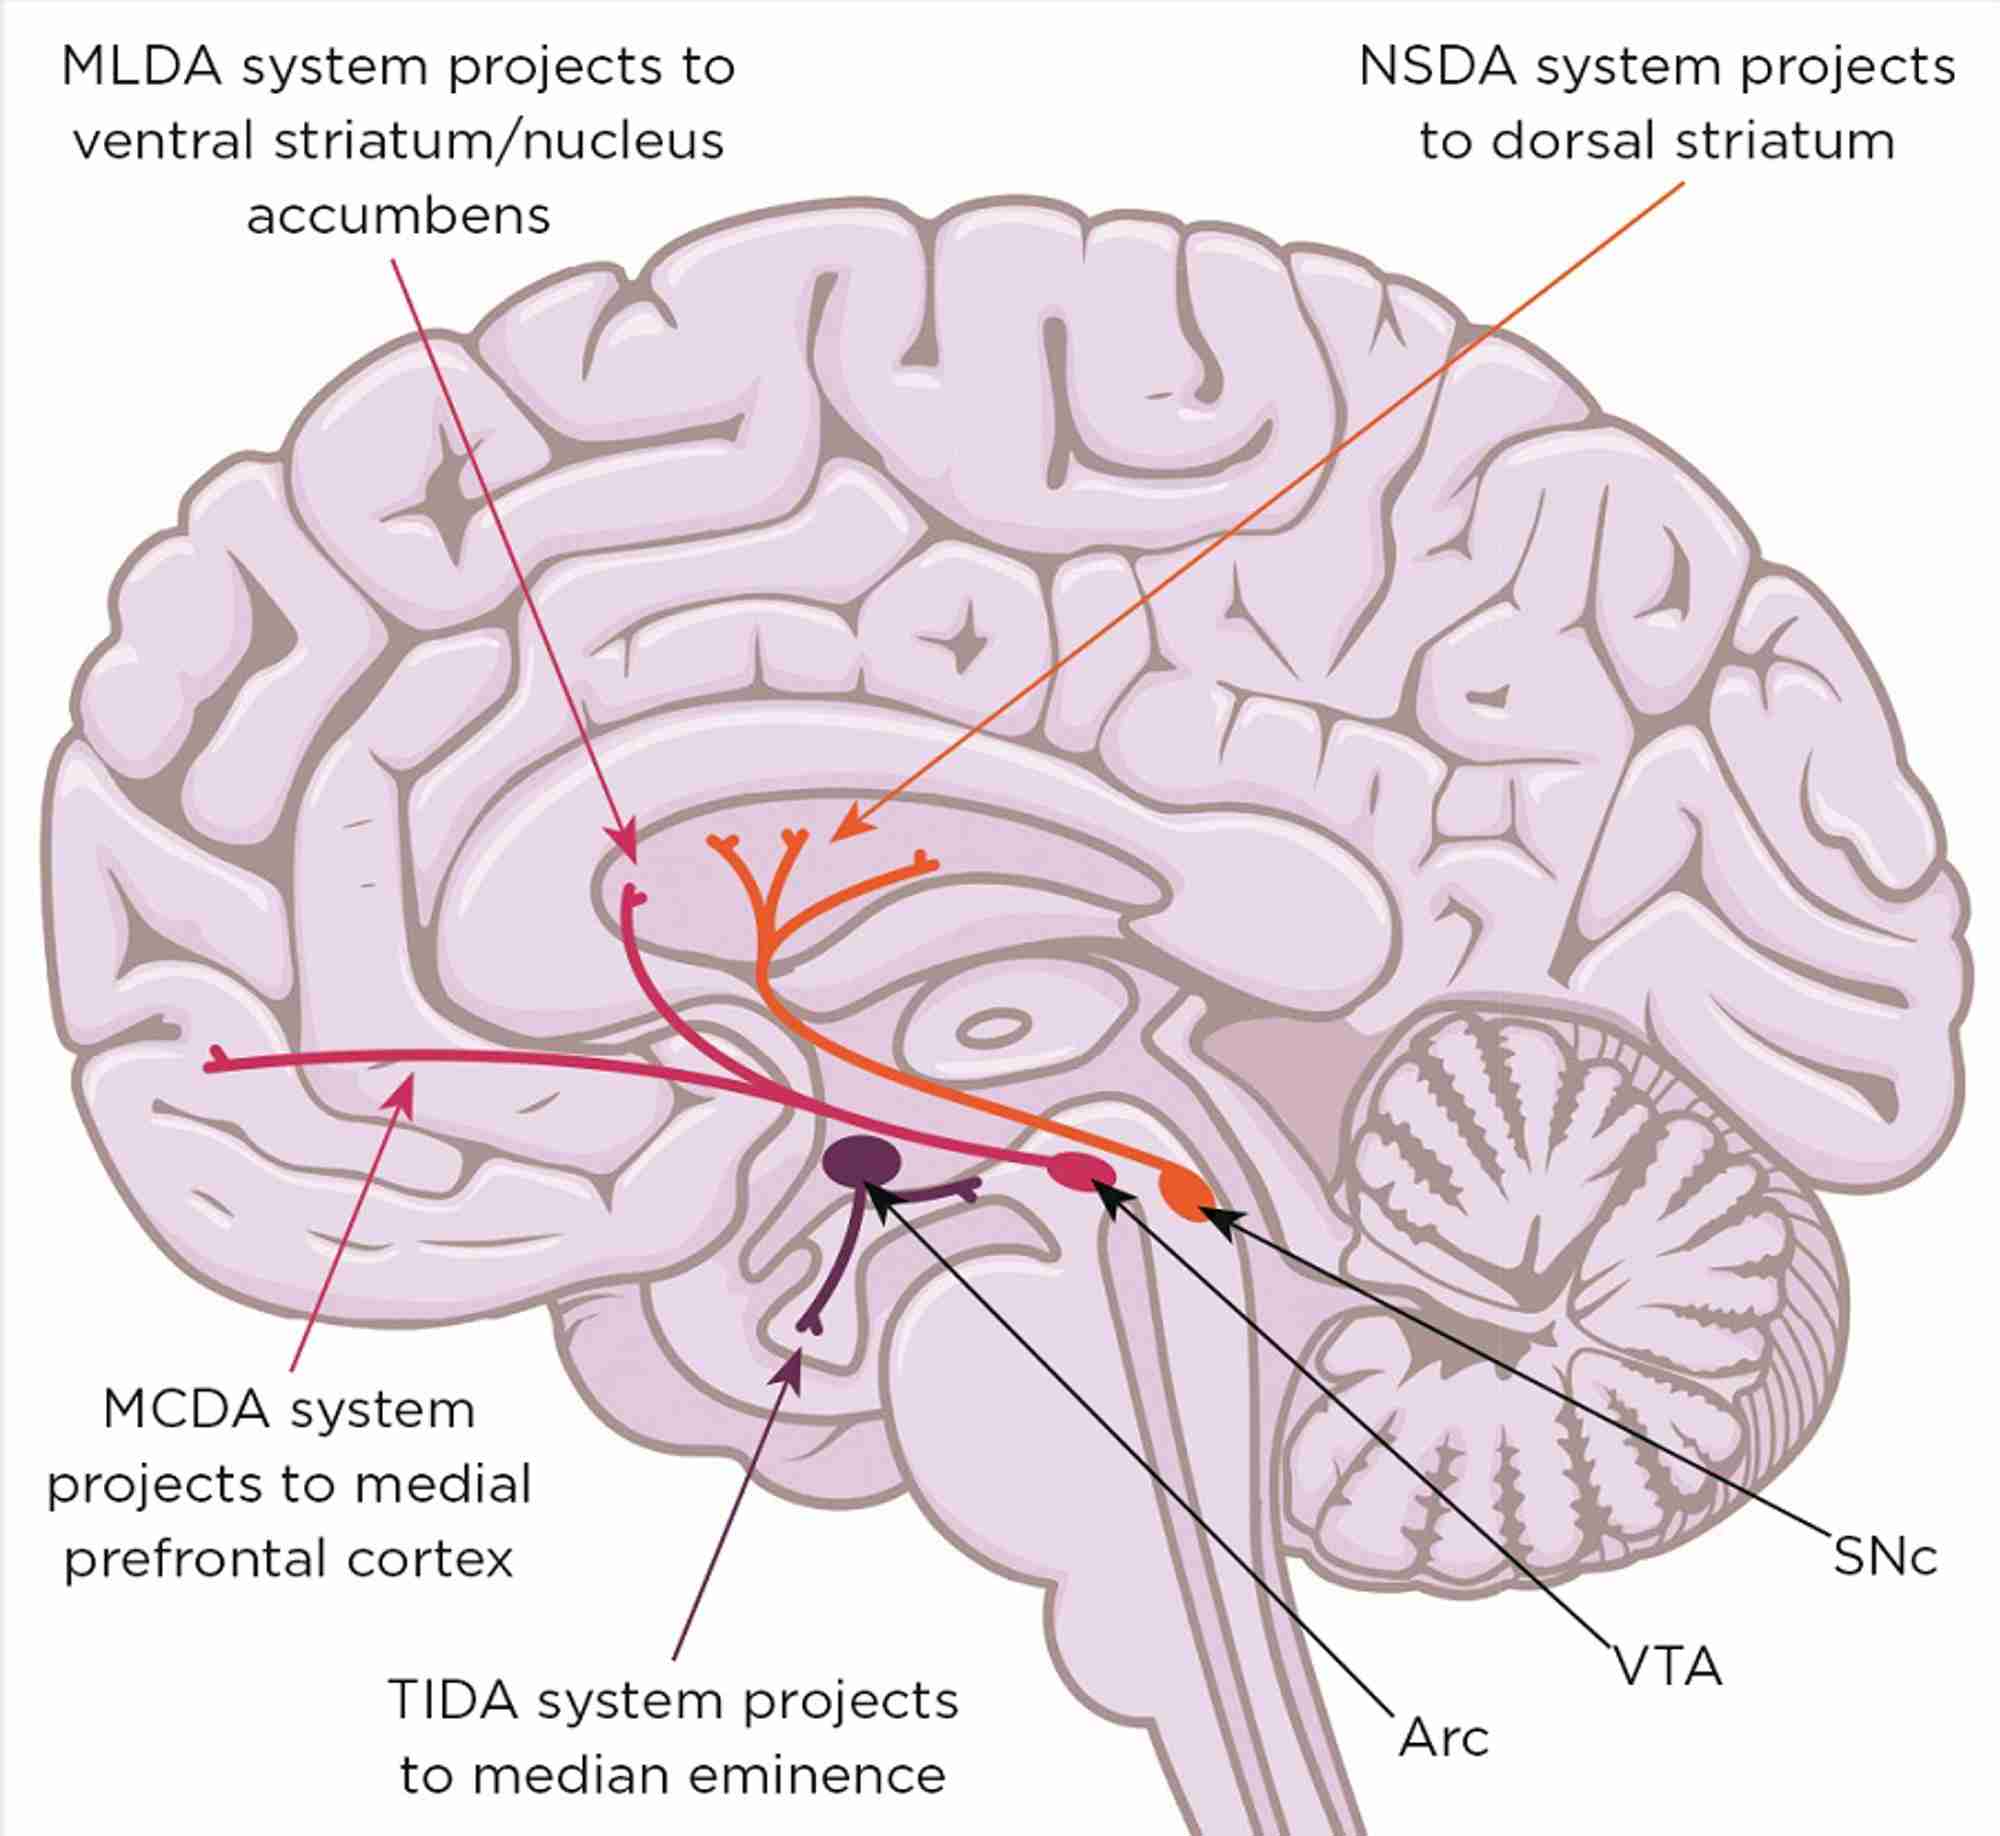 Figure 1. Midbrain dopaminergic systems. Neurones in the substantia nigra pars compacta (SNc) form the nigrostriatal dopaminergic (NSDA) system (involved in sensorimotor regulation) and degenerate in the movement disorder Parkinson’s disease. Neurones in the ventral tegmental area (VTA) form the mesolimbic dopaminergic (MLDA) system (involved in reward and feeding) and the mesocortical dopaminergic (MCDA) system (involved in decision making and working memory); their dysfunction is involved in schizophrenia, attention deficit/hyperactivity disorder, autism spectrum disorders, depression and addiction. Arc, arcuate nucleus; TIDA, tuberofundibular dopaminergic system.  Brain image: Shutterstock